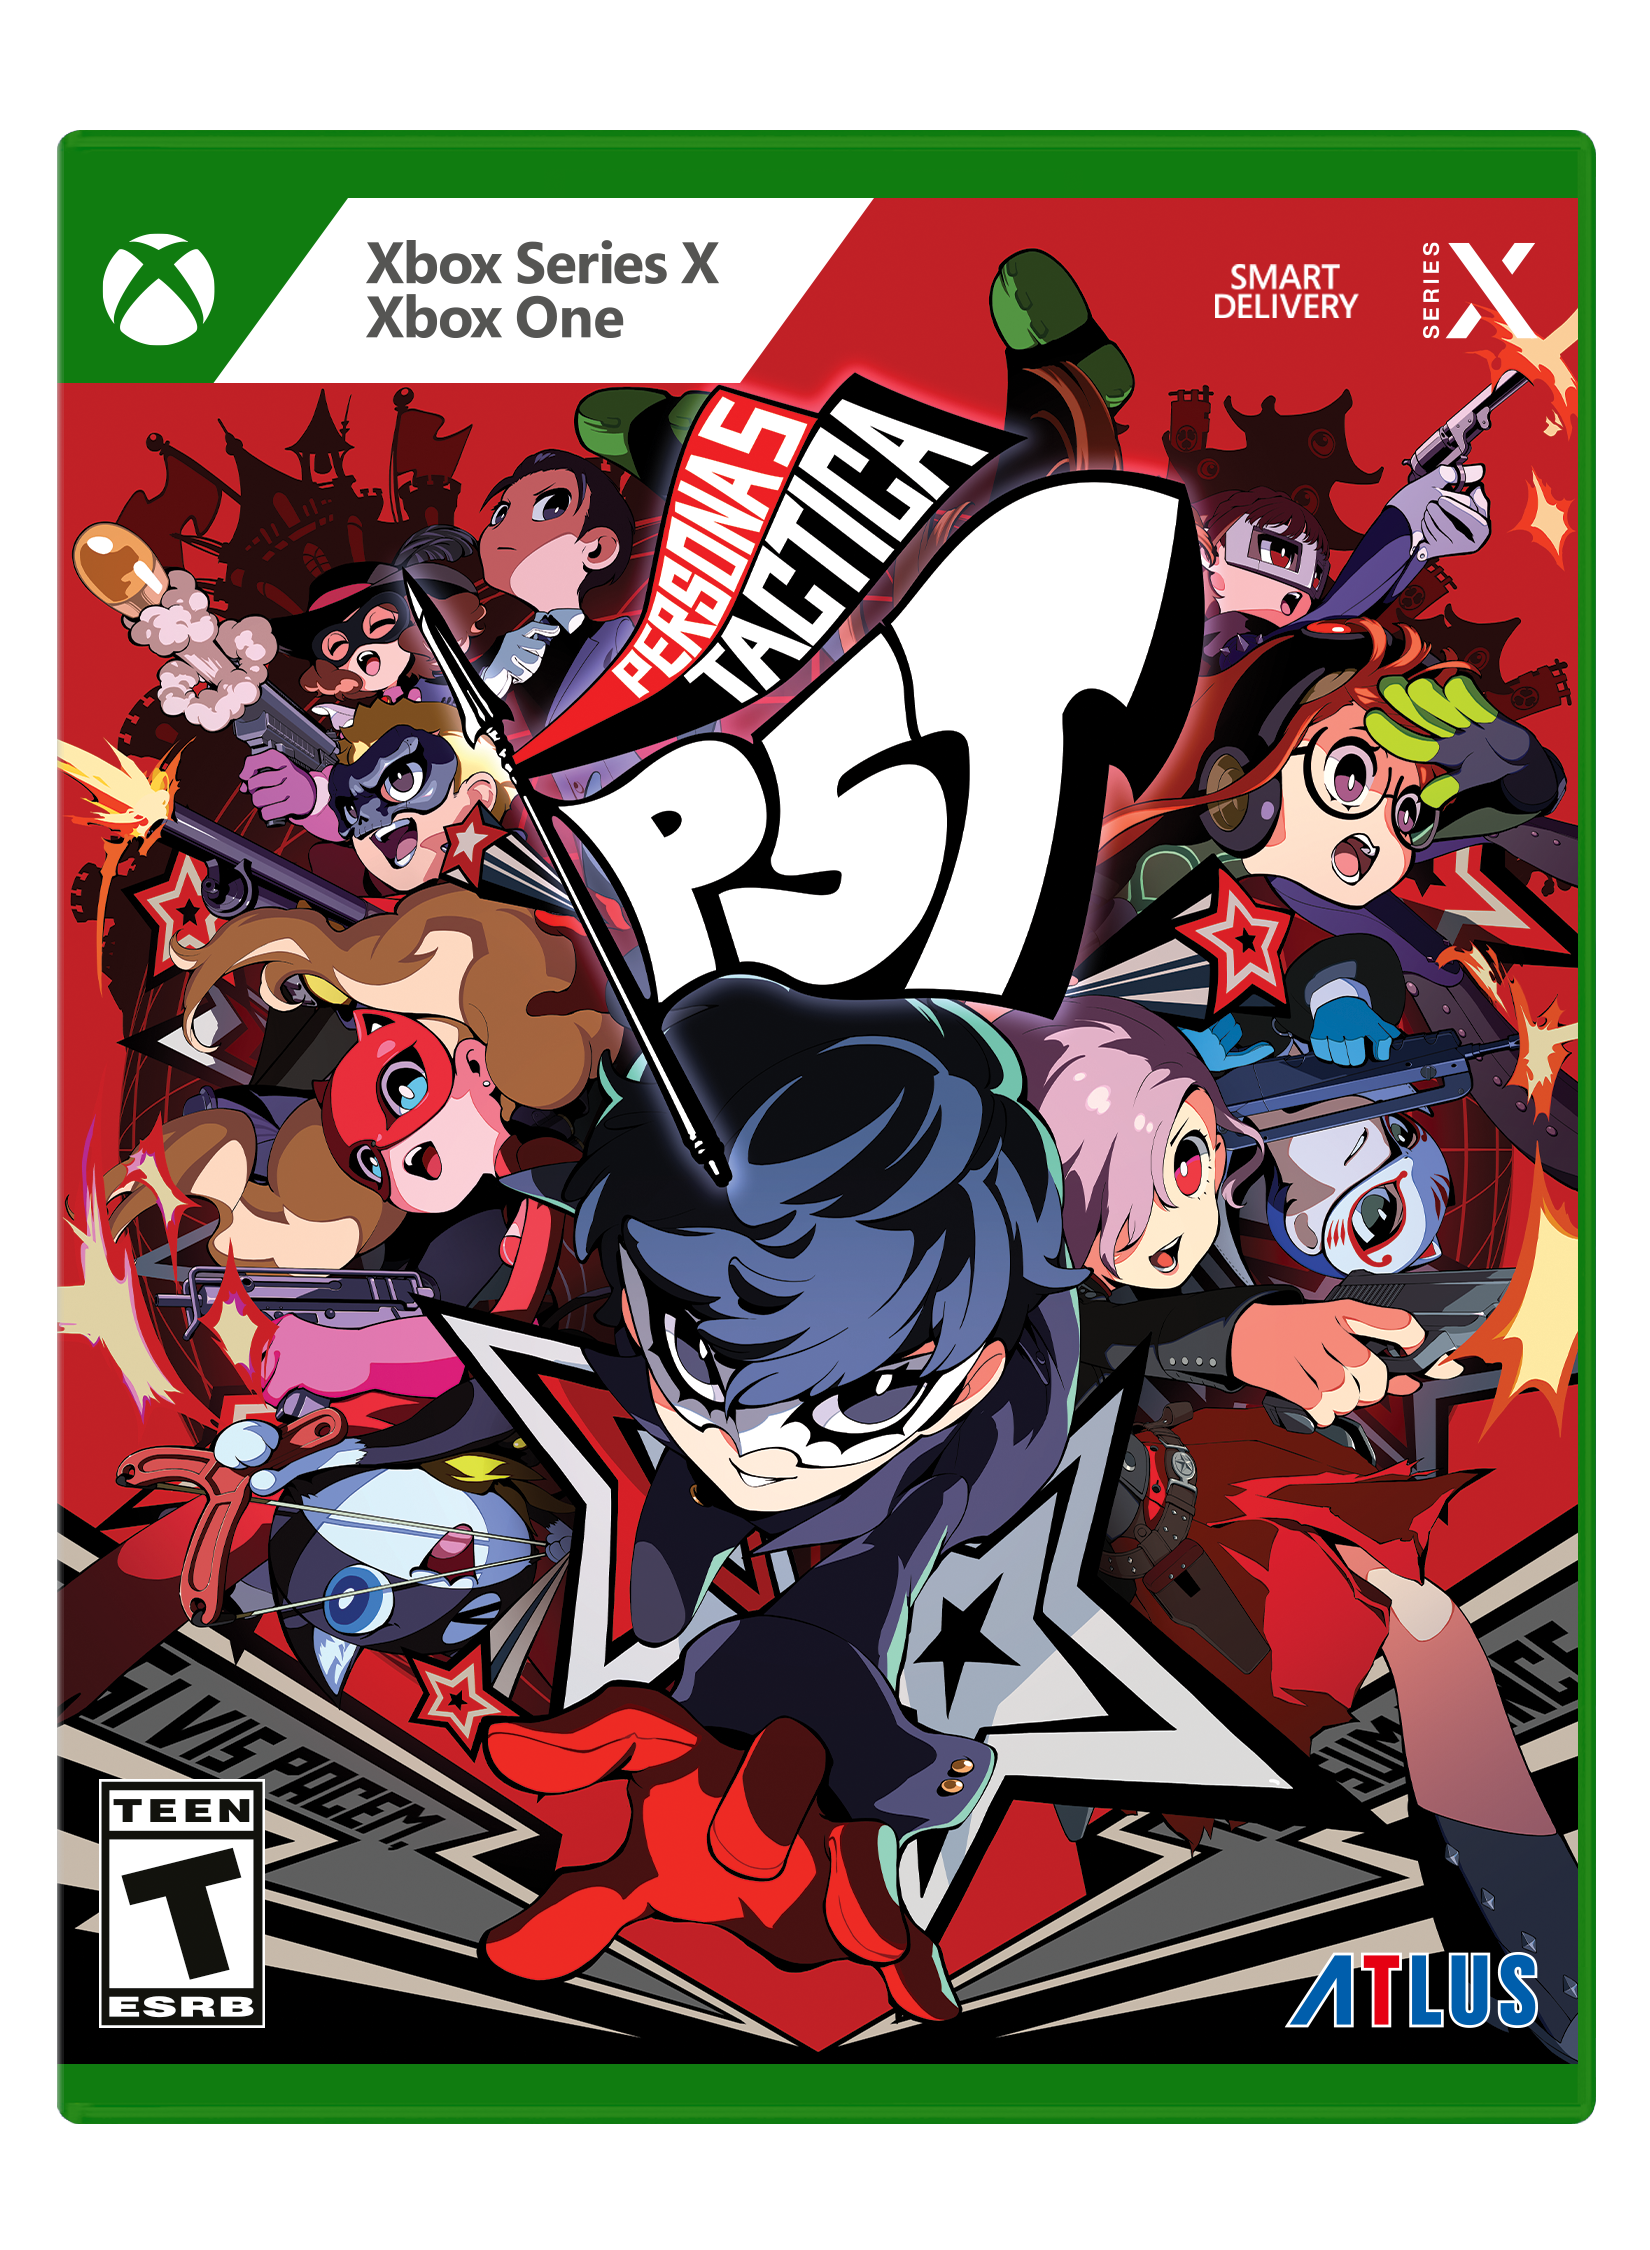 Is Persona 5: Tactica Coming Out on Xbox & PC Game Pass? - GameRevolution